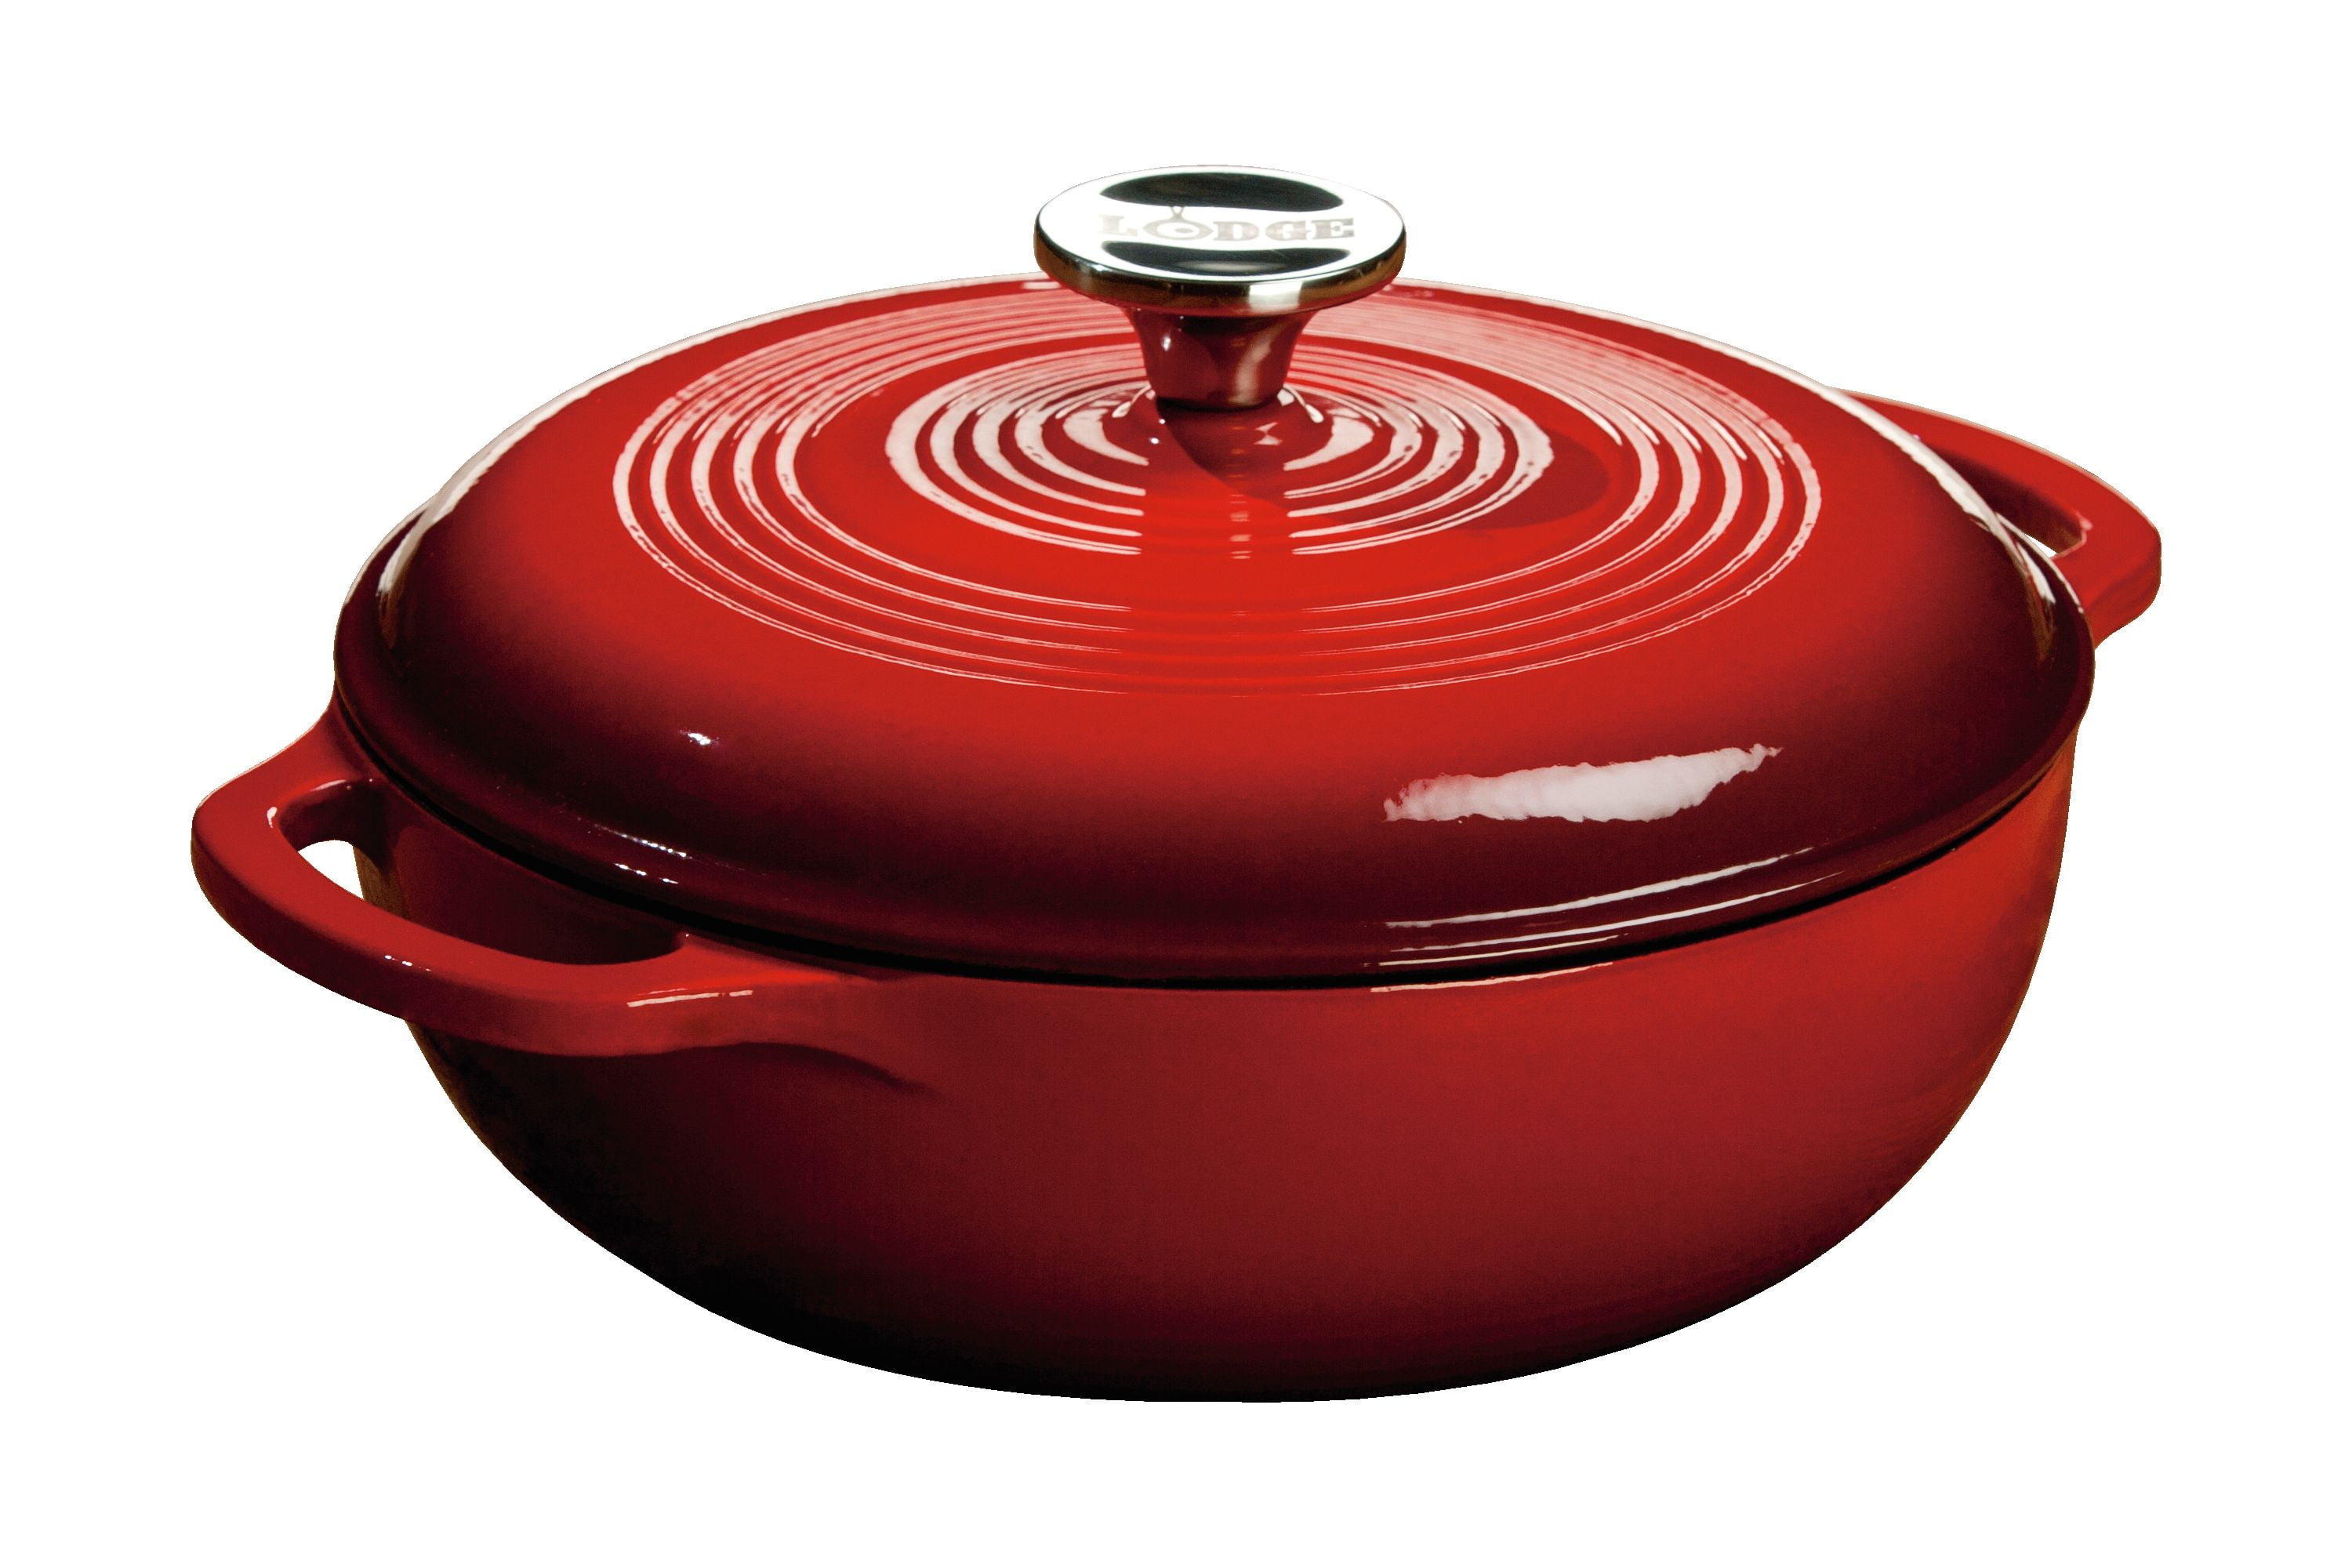 Lodge Cast Iron Cast Iron Enameled Dutch Oven, EC7D13 at Tractor Supply Co.